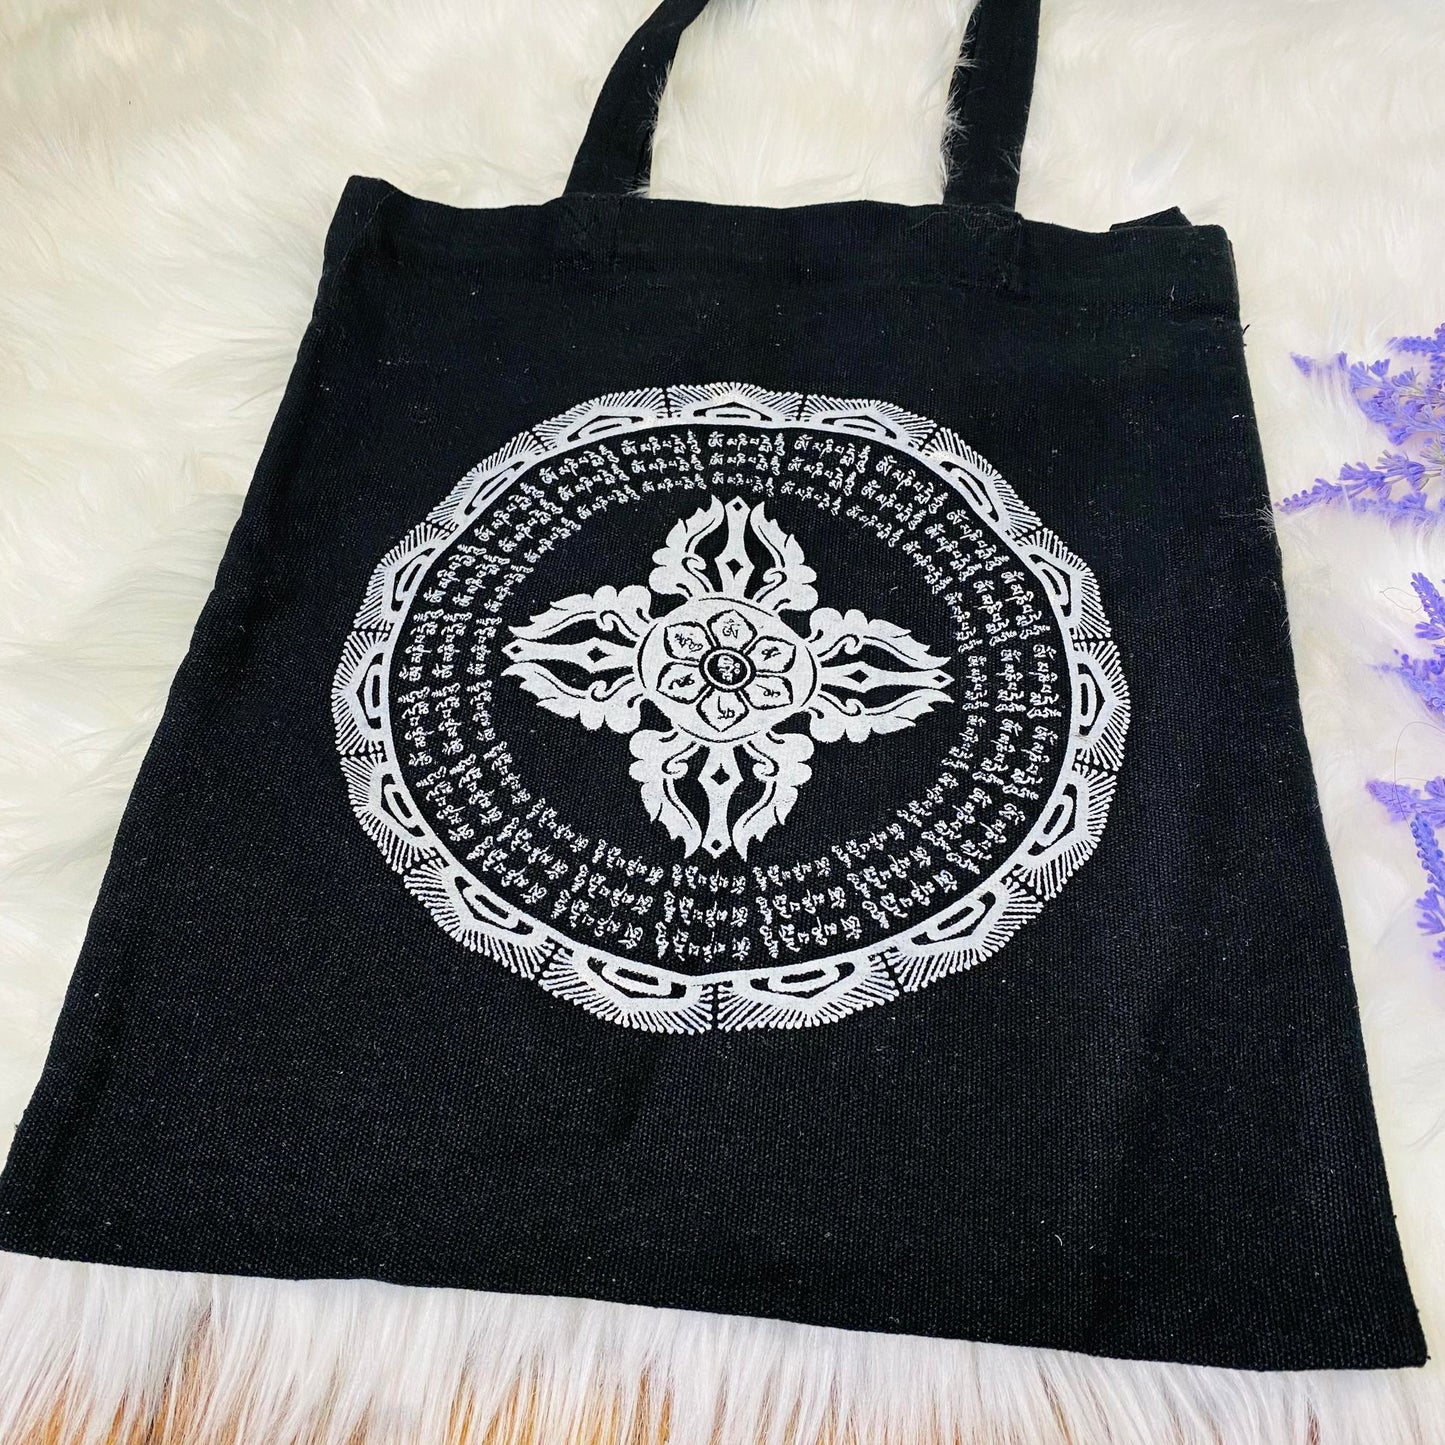 Organic Cotton Tote Bag, Vajra Design Bags, Shopping Bags, Ecofriendly Reusable Bag, Zippered Bag, Unisex Tote Bags, Gift For Him/Her